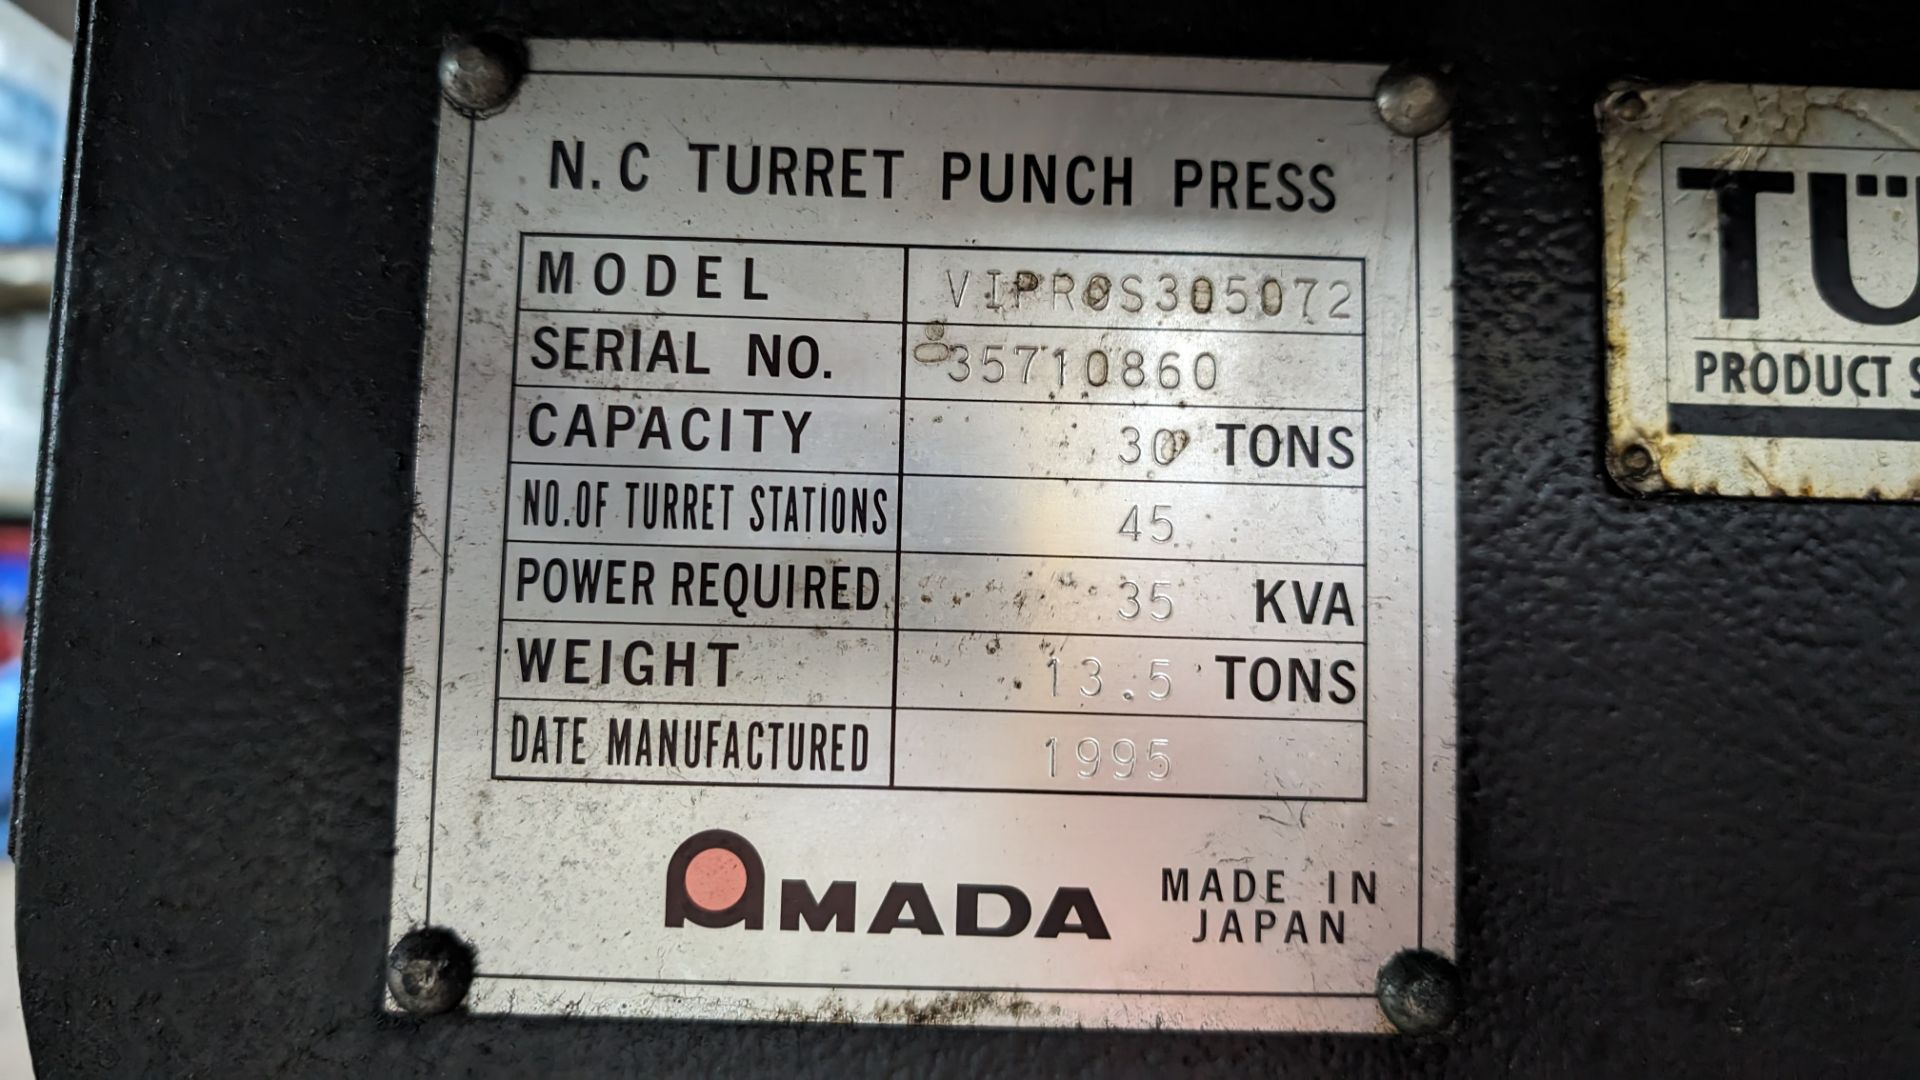 1995 Amada Vipros 357 NC turret punch press, 45 turret stations, 30 ton capacity, serial number 3571 - Image 26 of 51